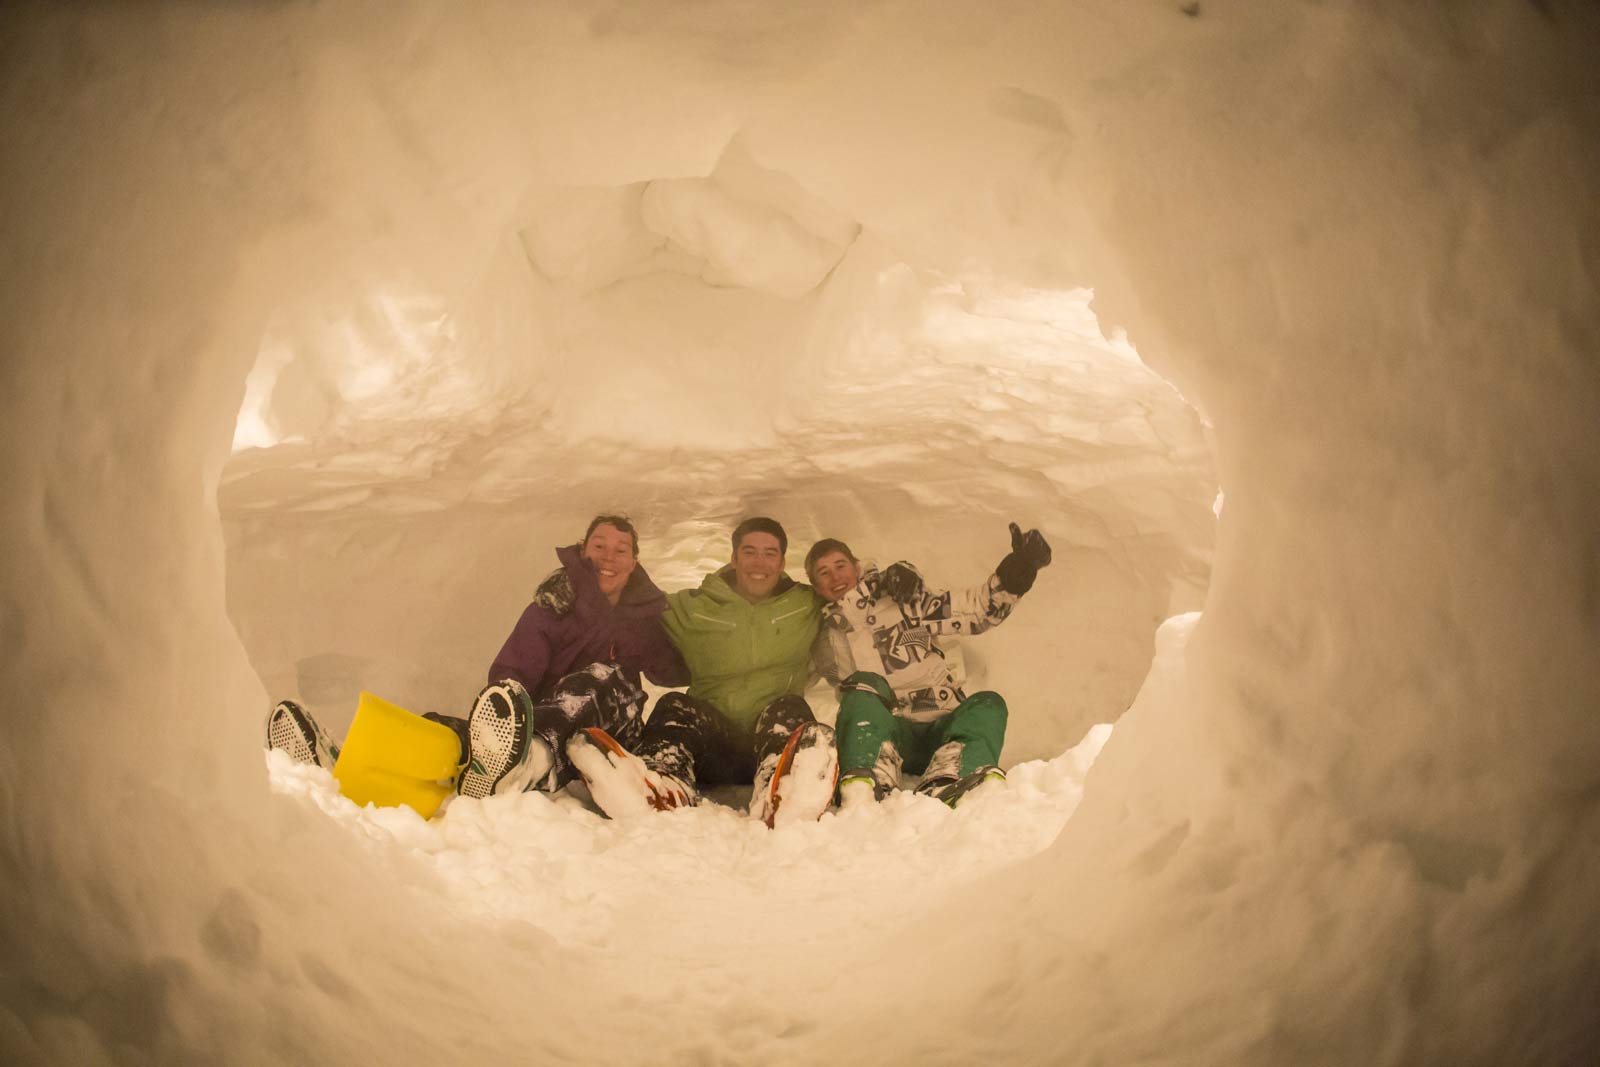 Finally, inside their snow cave ready for a cosy night.